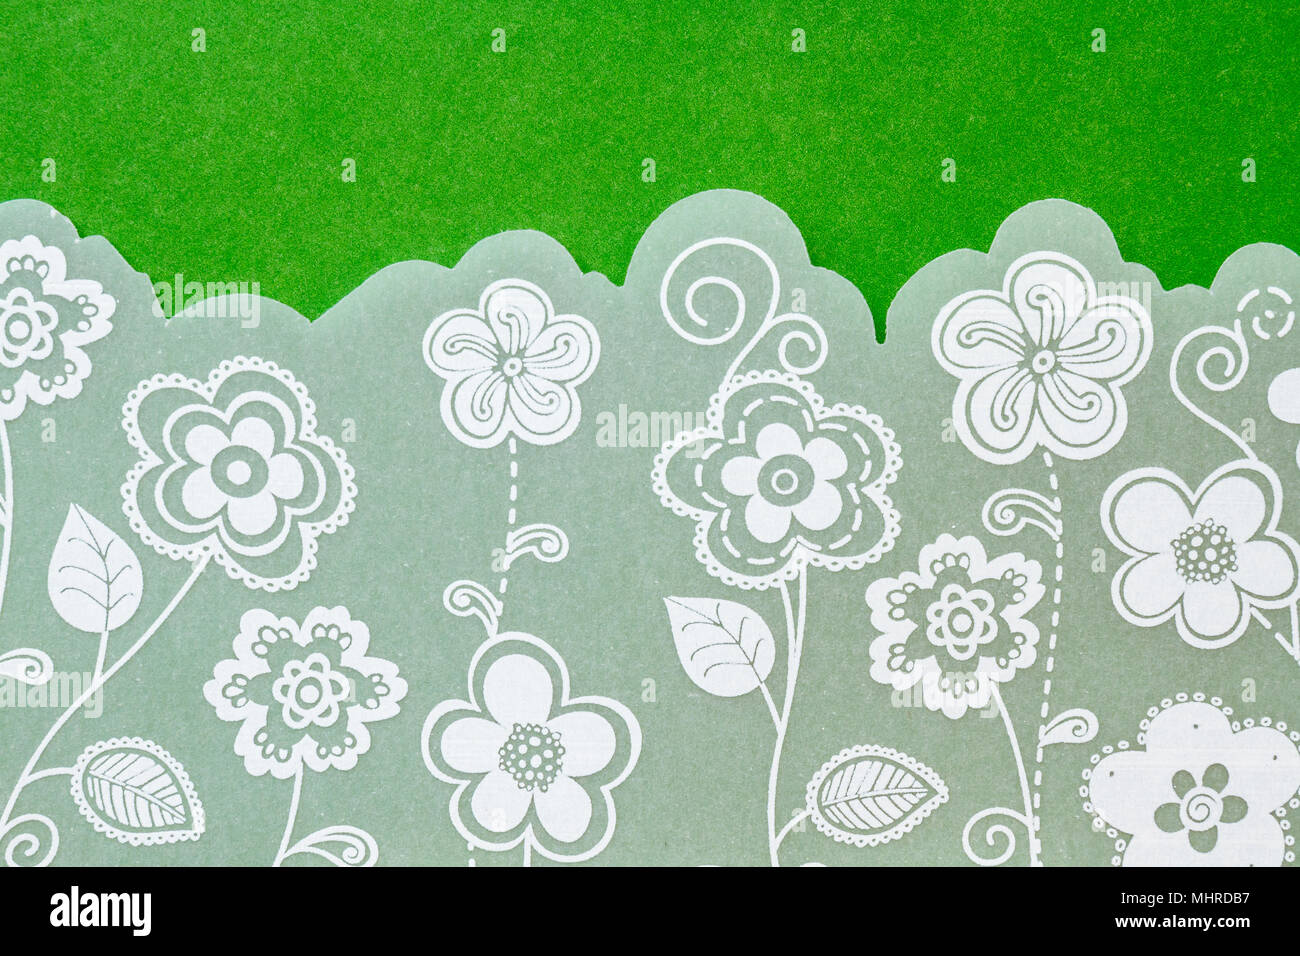 White wedding invitation with flowers lace illustration on green background. Close-up horizontal shot. cute and beautiful elements. Stock Photo